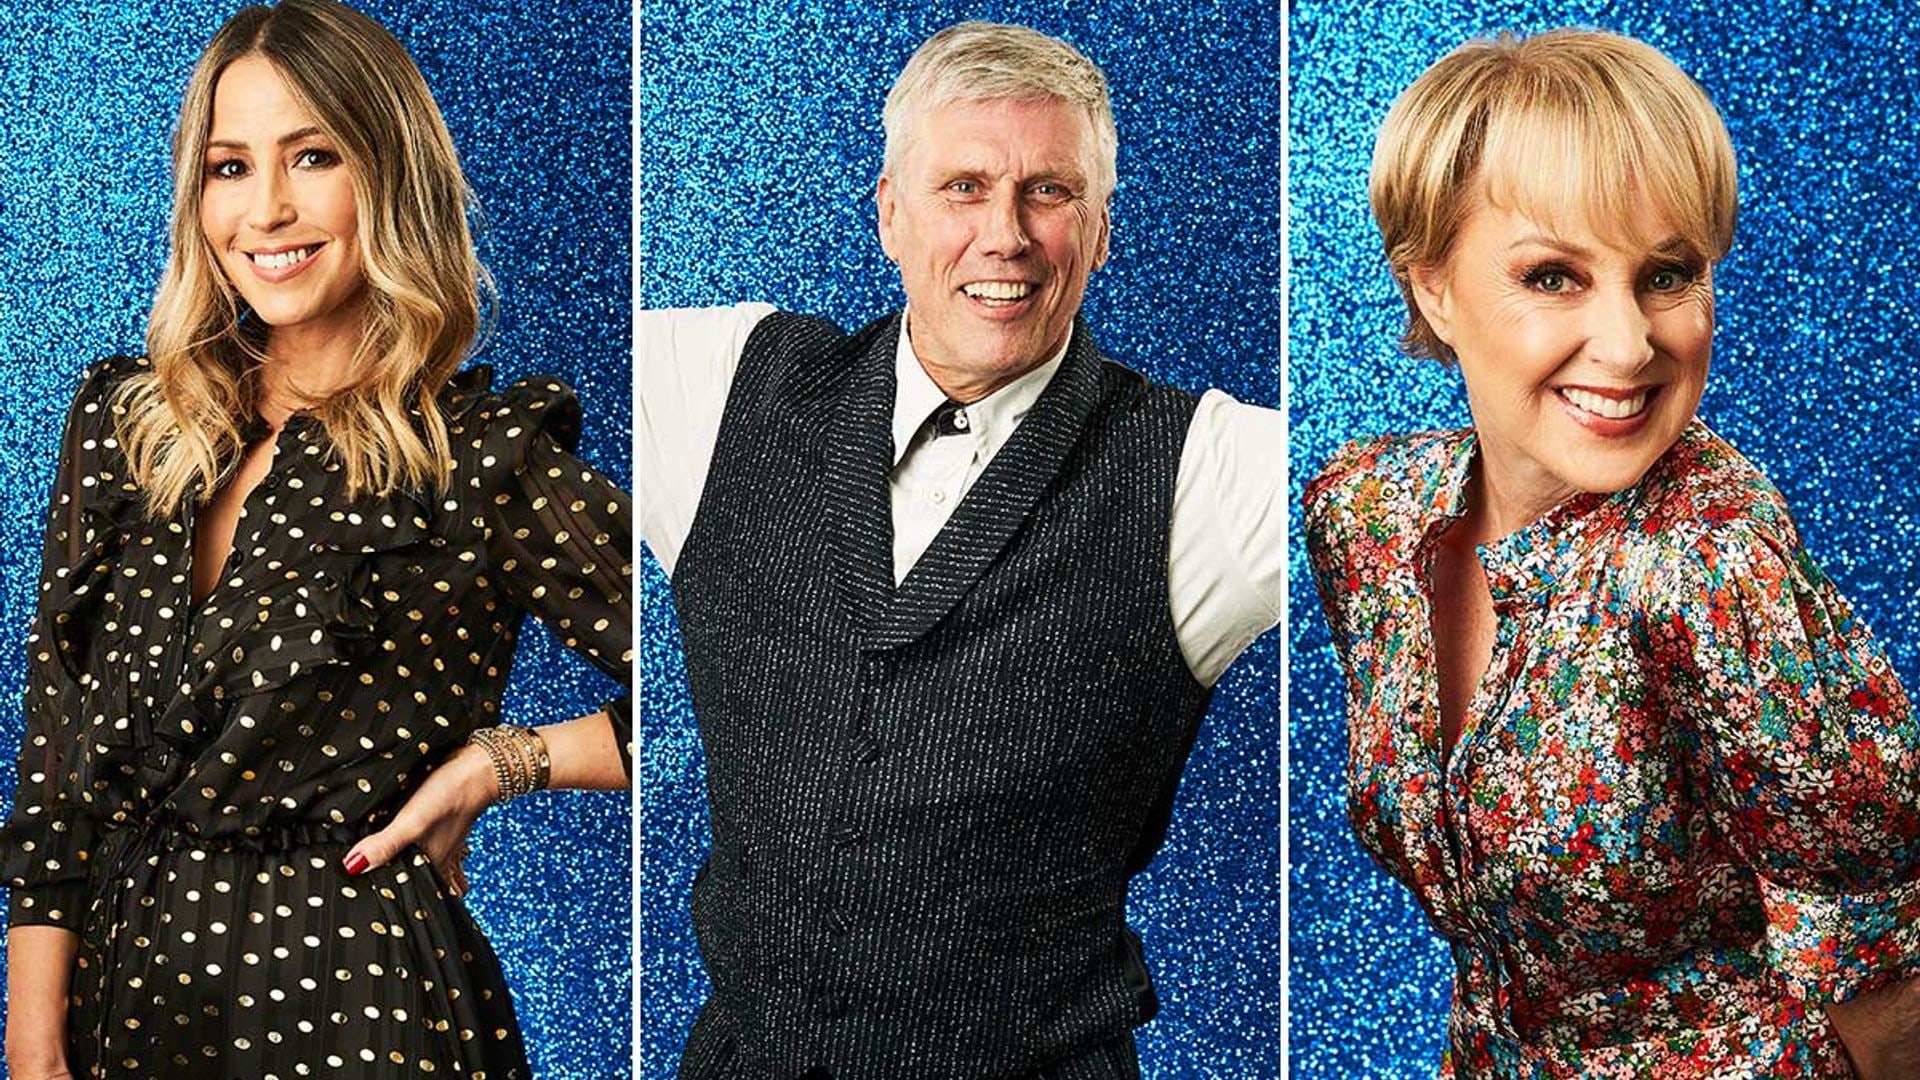 See the Dancing On Ice 2022 complete line-up here!